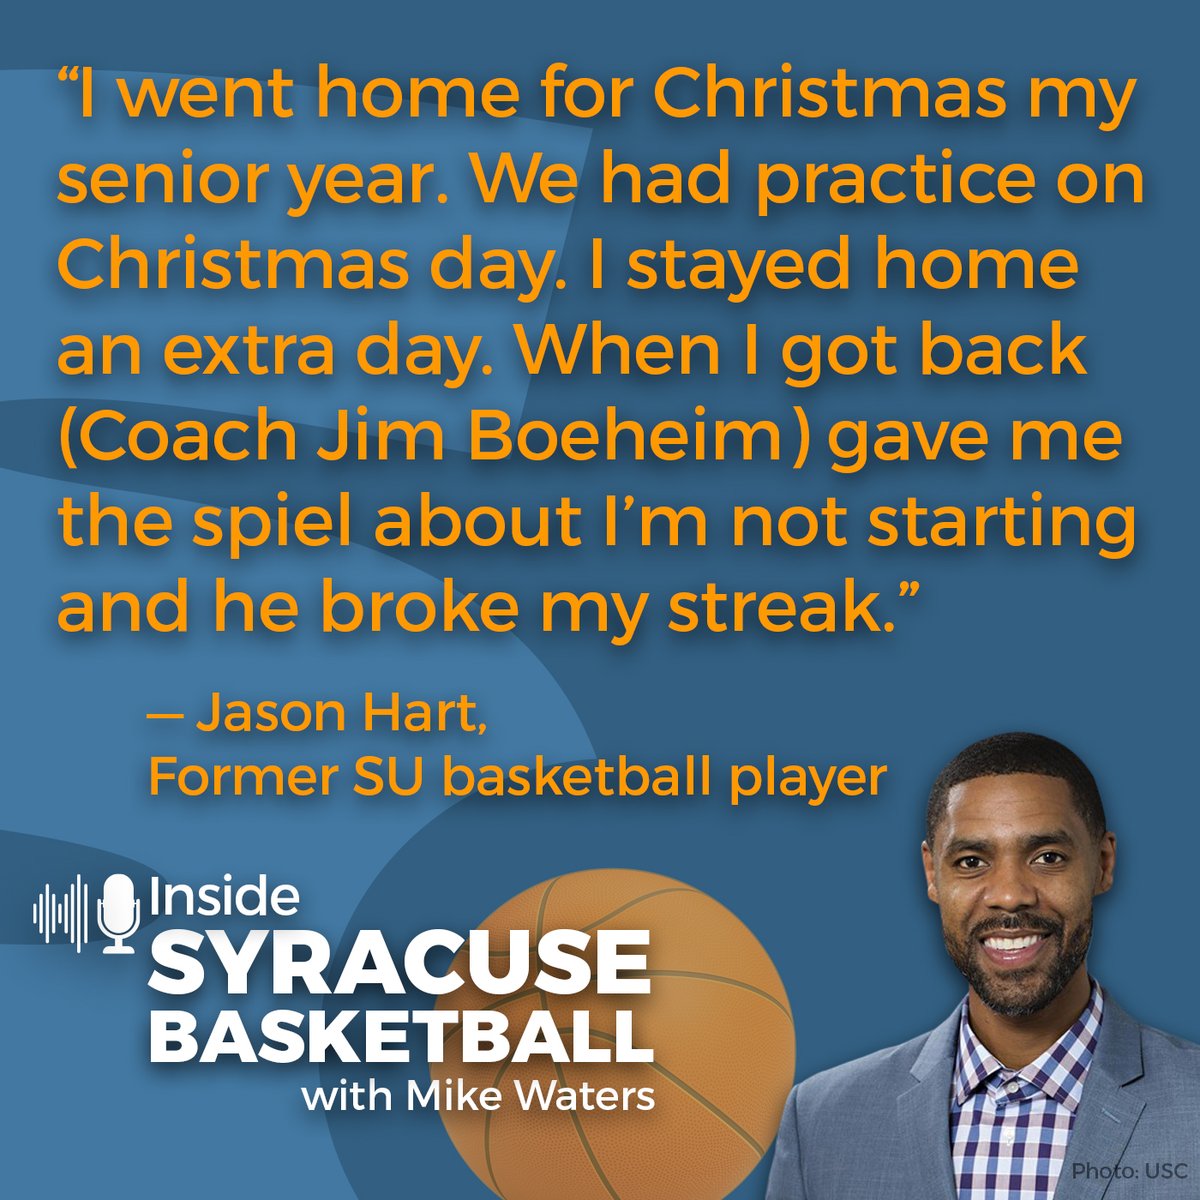 Inside Syracuse Basketball podcast with Jason Hart: How he almost never played for Syracuse and why he’s glad he did https://t.co/7c3ZKx2a5s https://t.co/HNXQcJtxSI https://t.co/j2HcPu4vwW